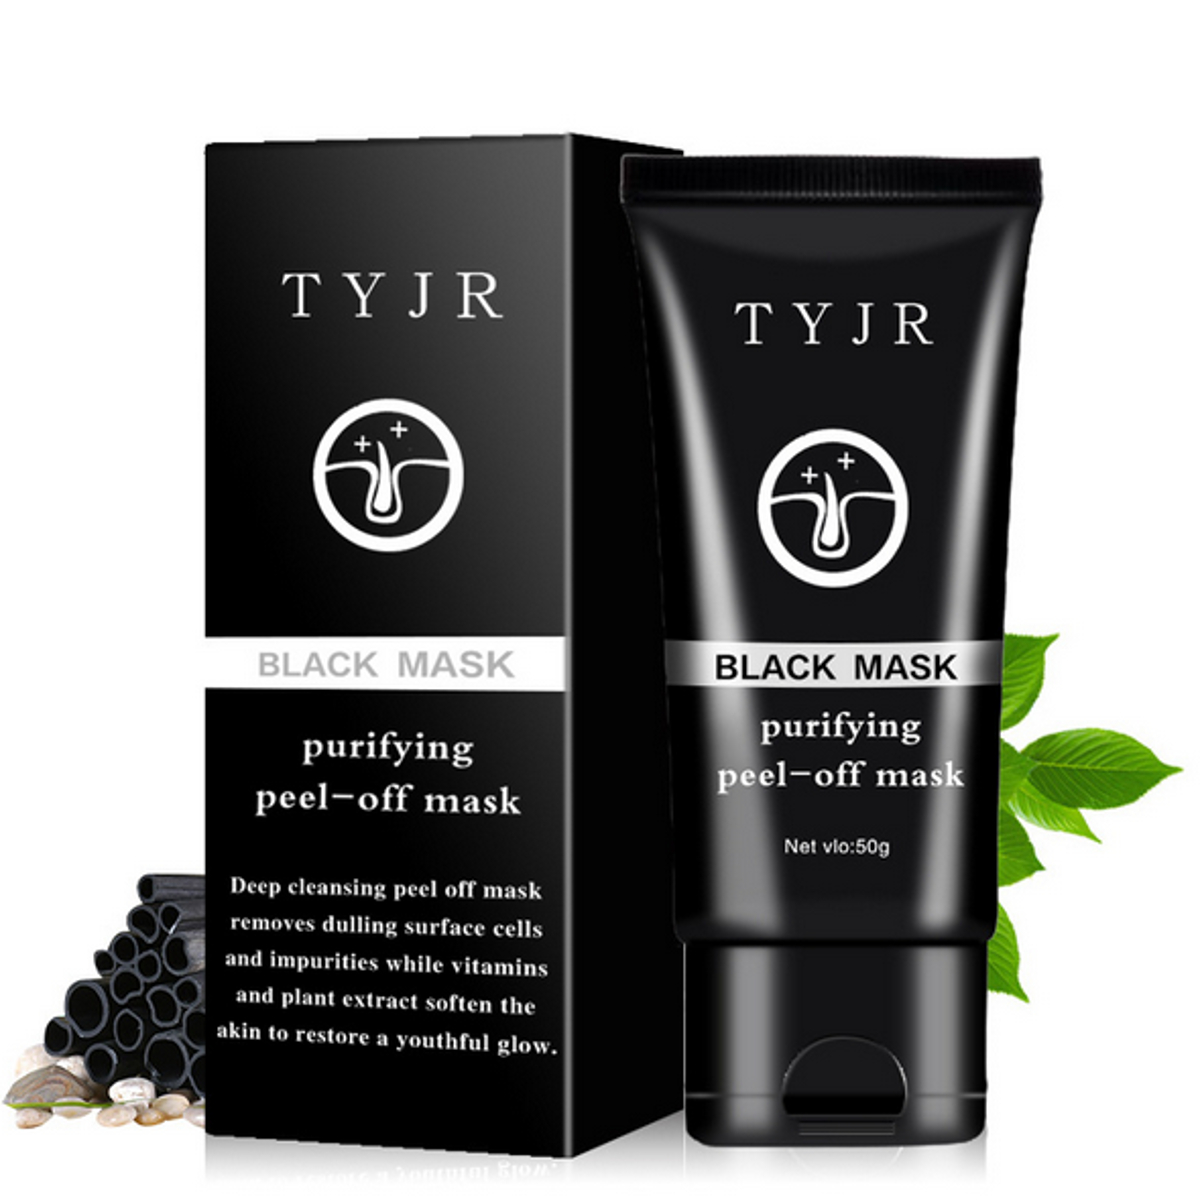 TYJR Blackhead Remover Face Mask Nose Acne Pore Deep Cleansing Purifying Peel Off Black Mud 50ml